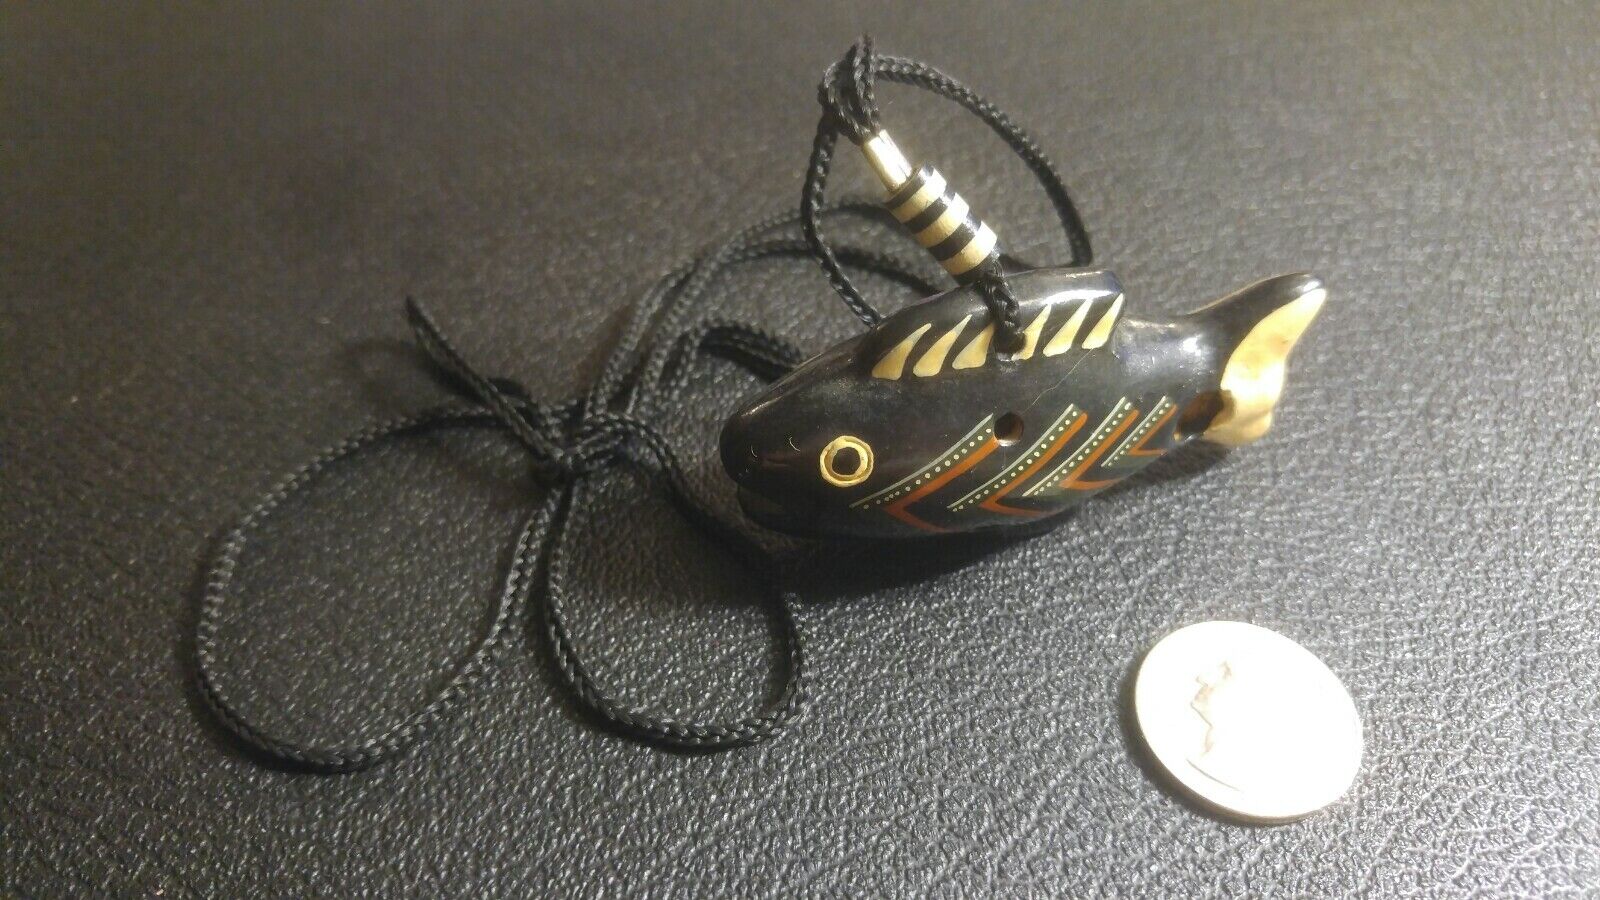 Vintage Handcarved Wooden Fish Whistle On Black Cord, Hand Painted, Souvenir